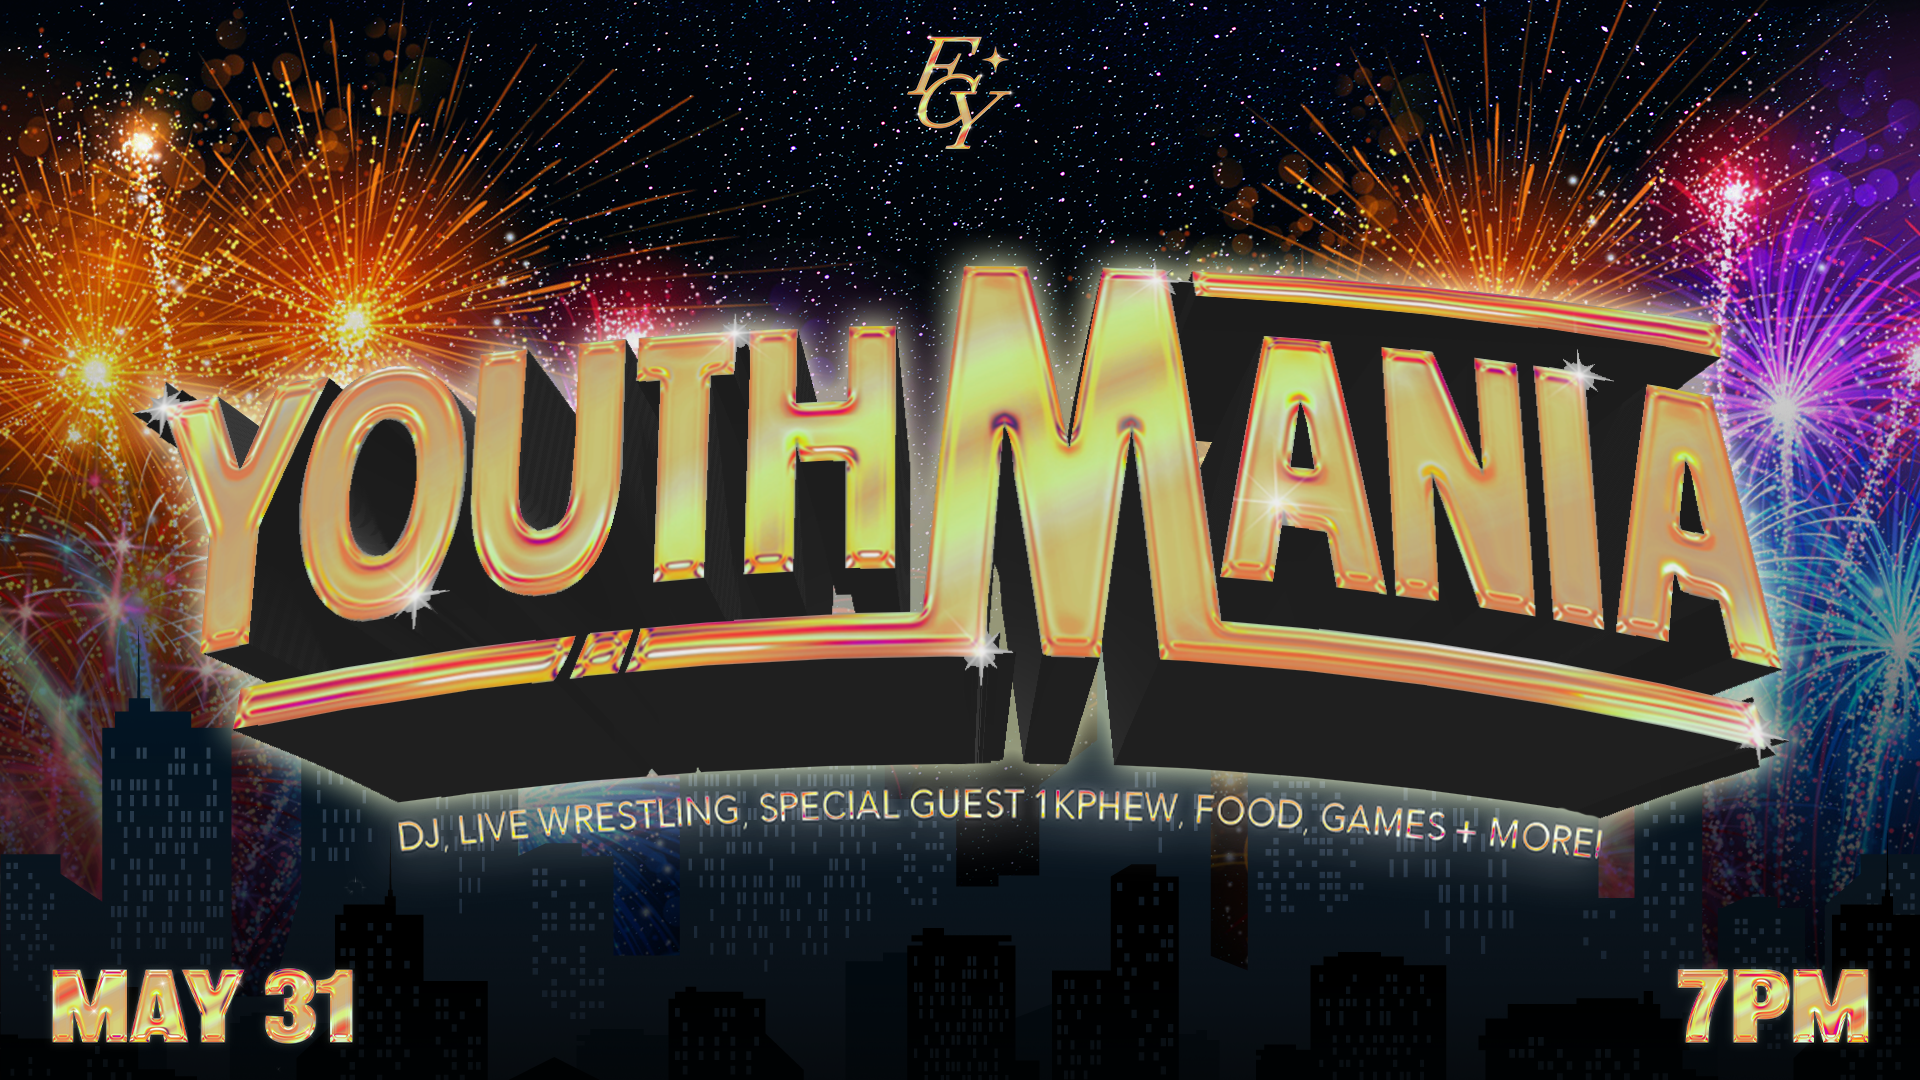 FCY United Night: YOUTHMANIA at the Braselton campus